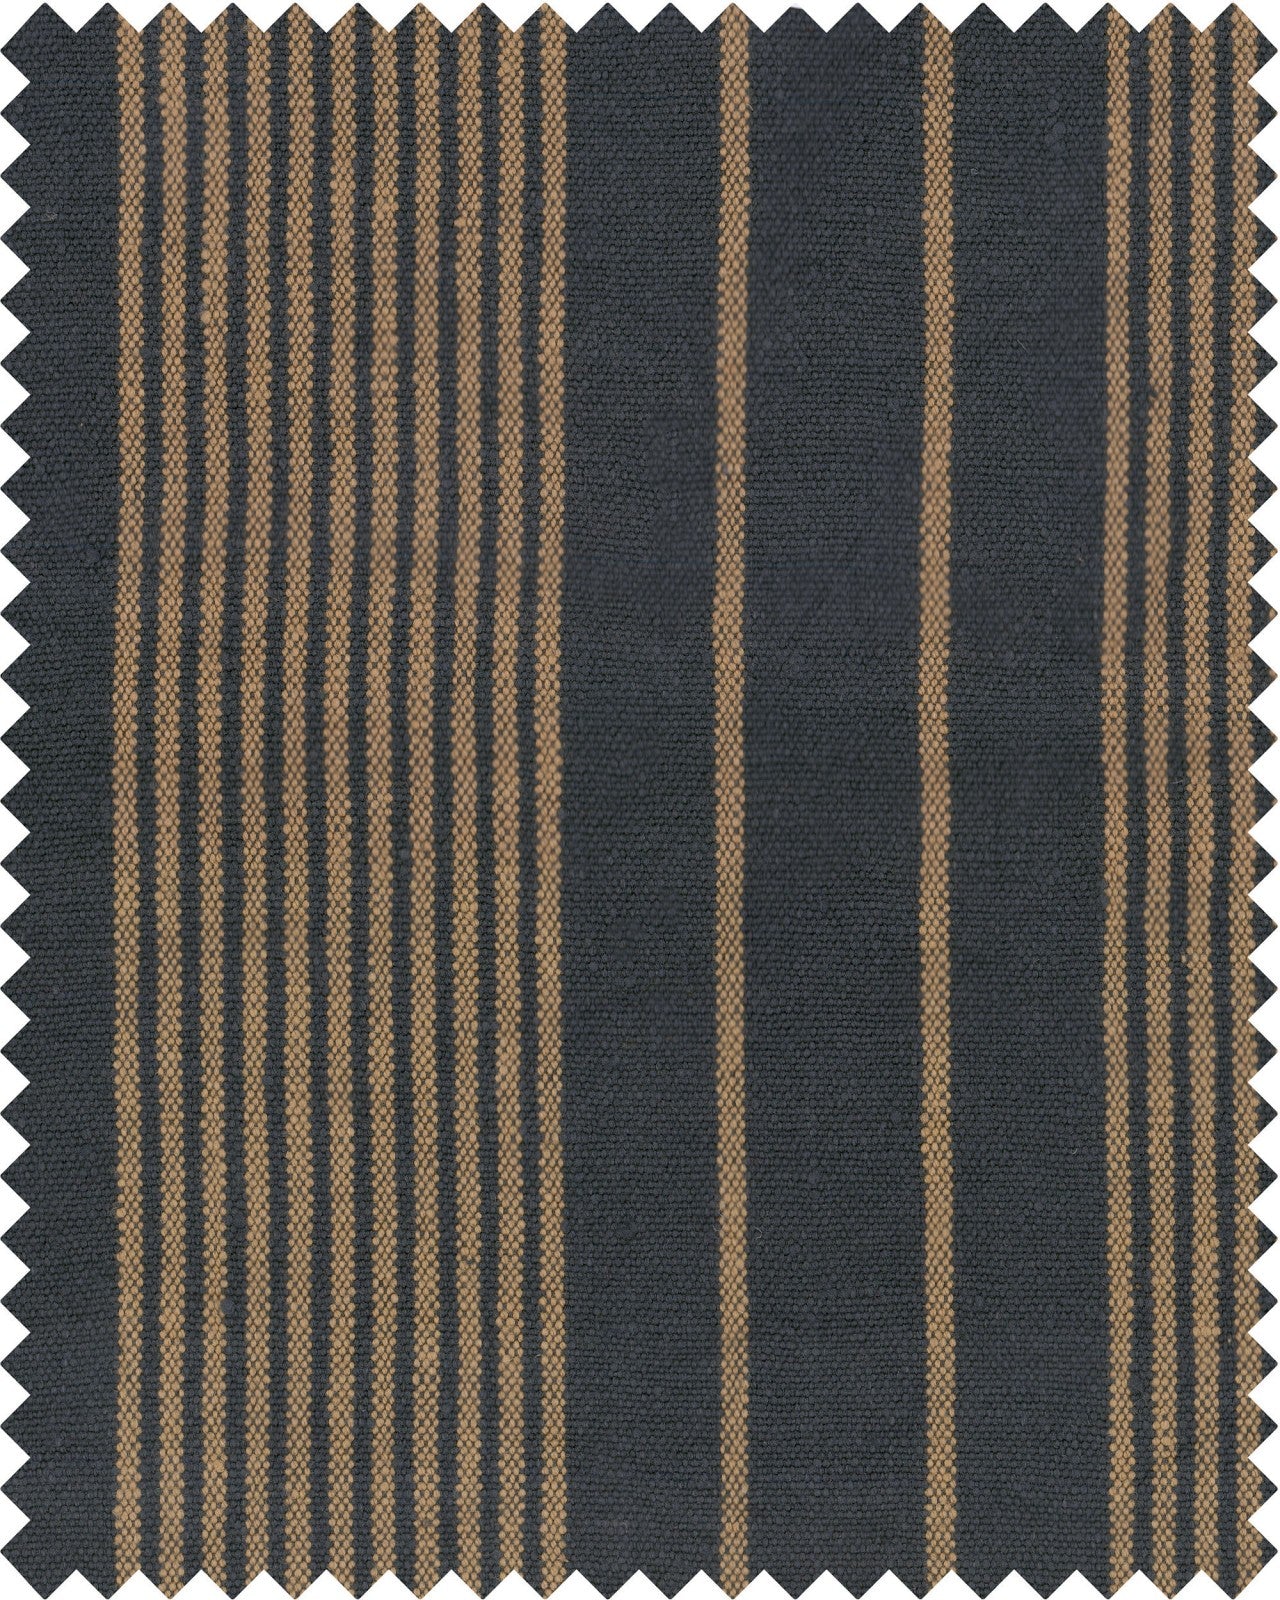 Newport Stripes Heavy Linen fabric in indigo taupe color - pattern number FB00079 - by Mind The Gap in the Woodstock collection